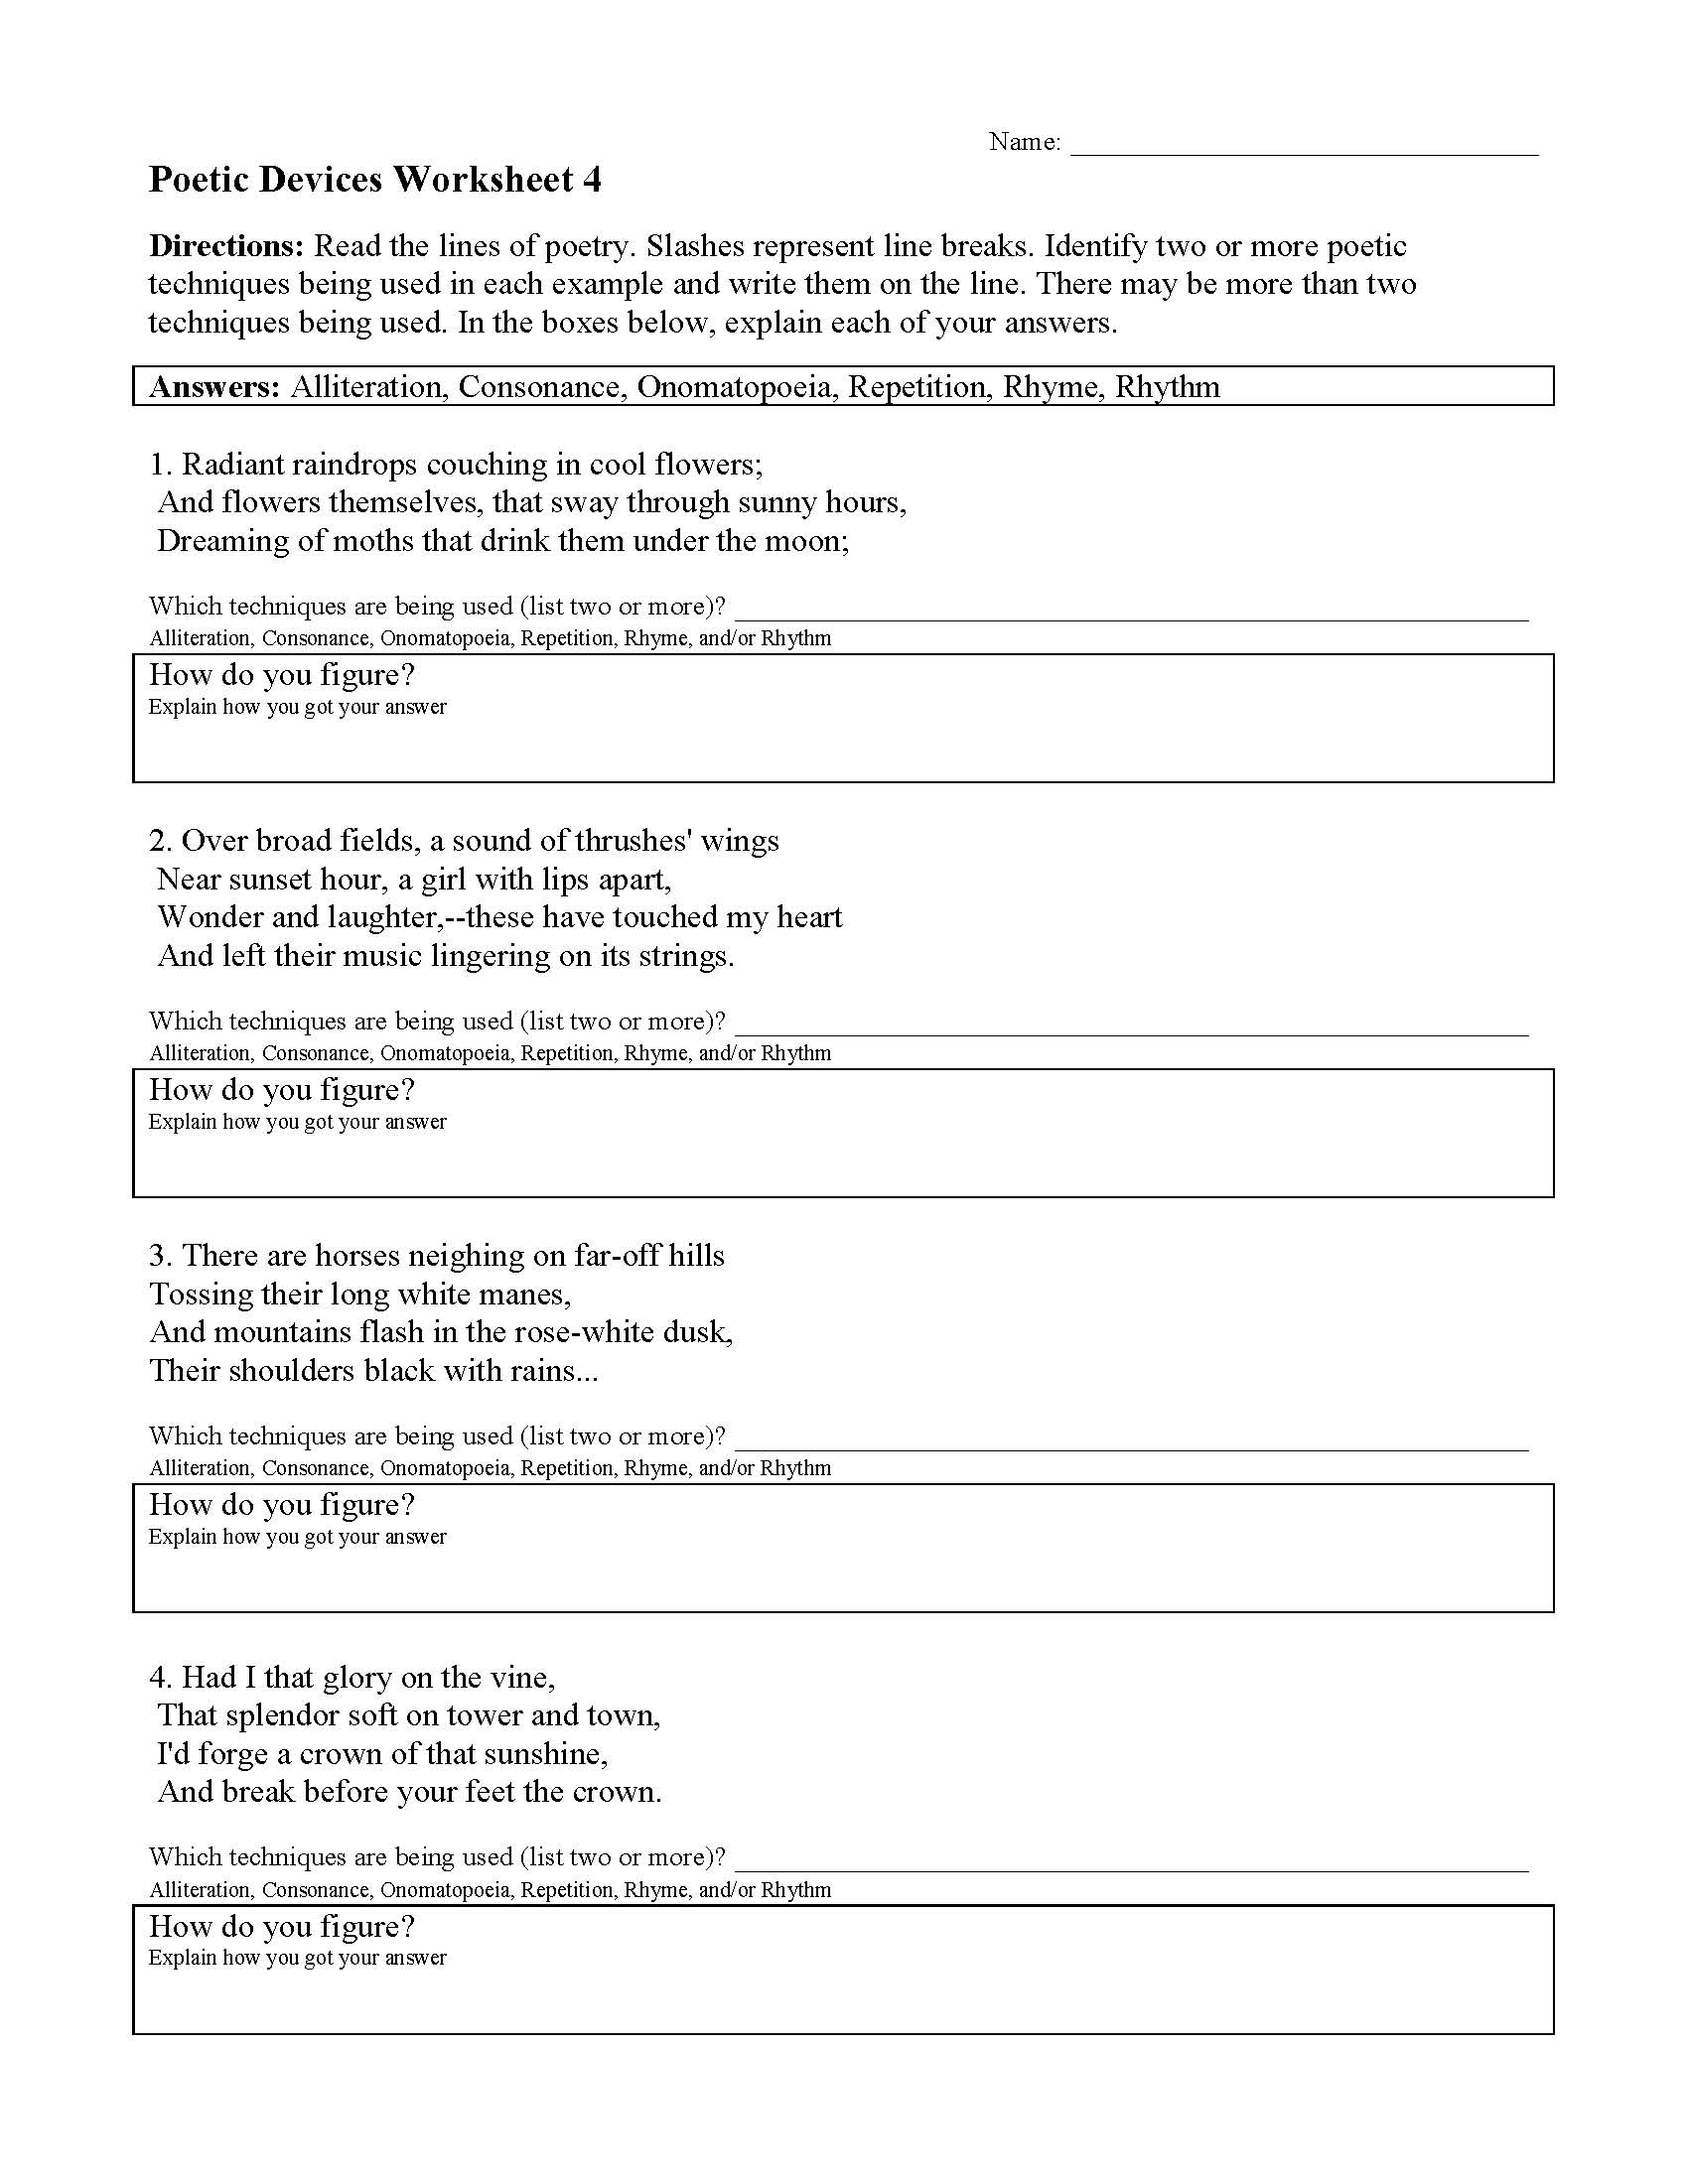 Poetic Devices Worksheet 22  Reading Activity For Sound Devices In Poetry Worksheet